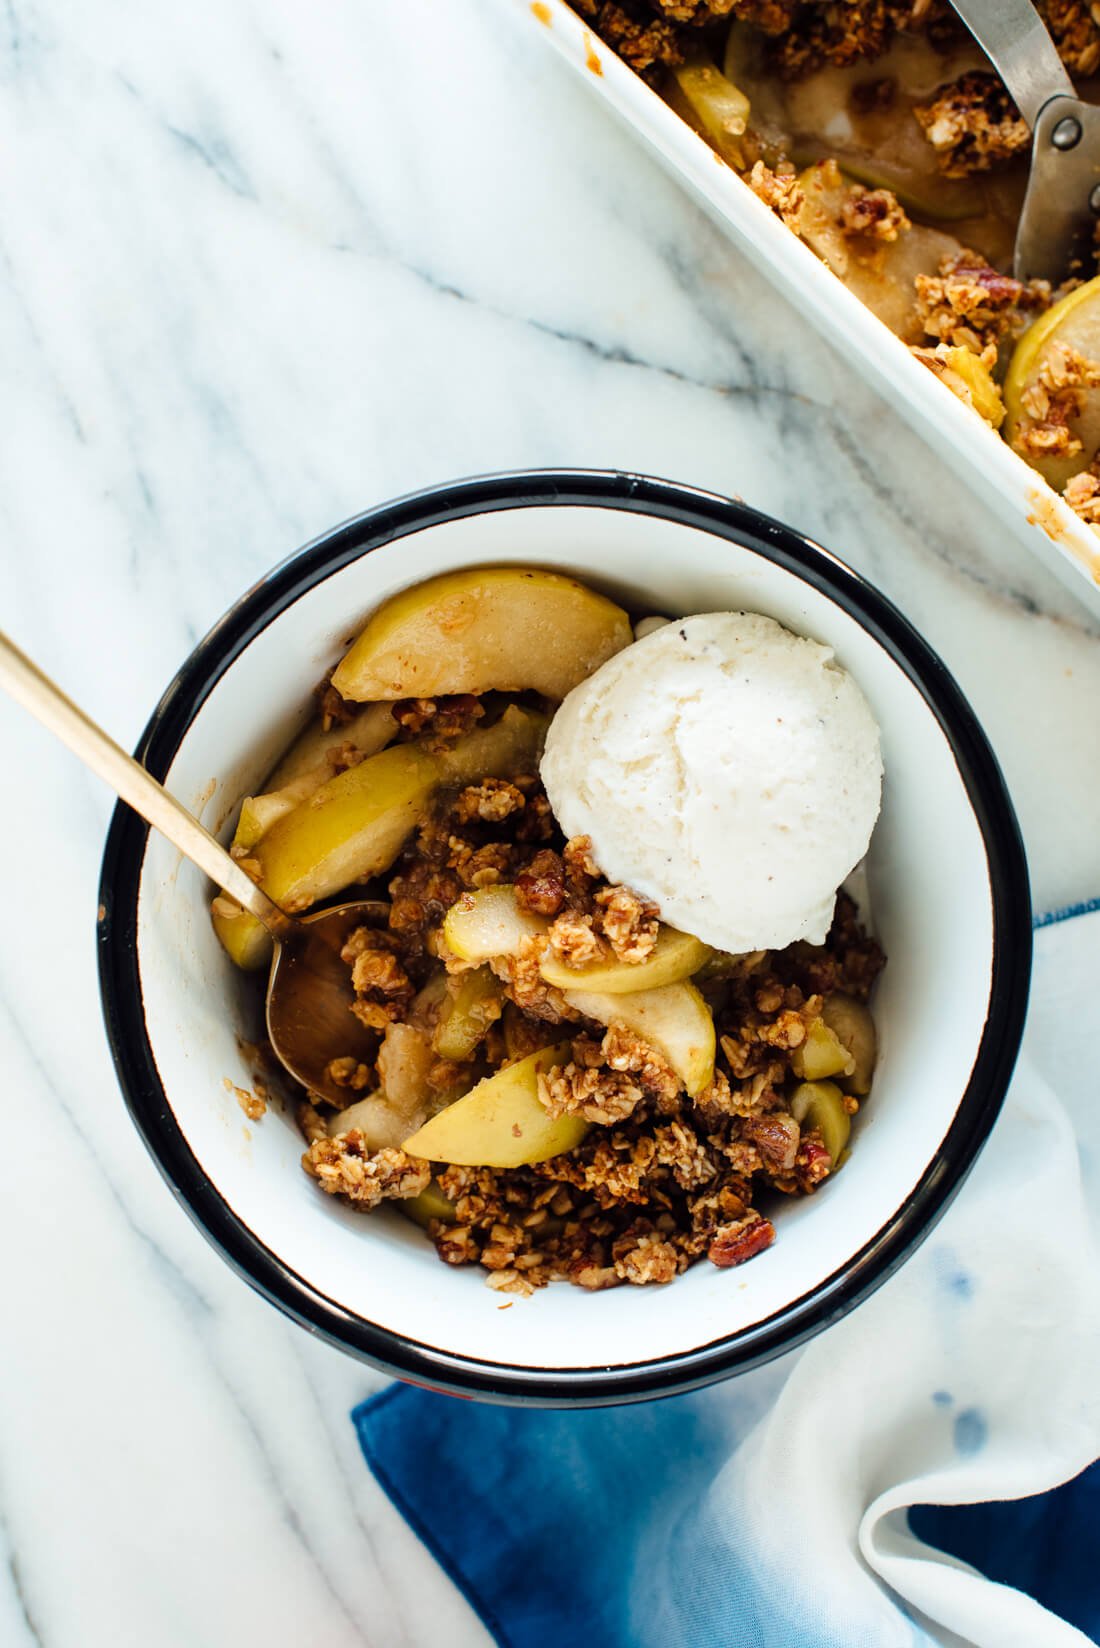 Gluten-free apple crisp recipe, perfect for the holidays!